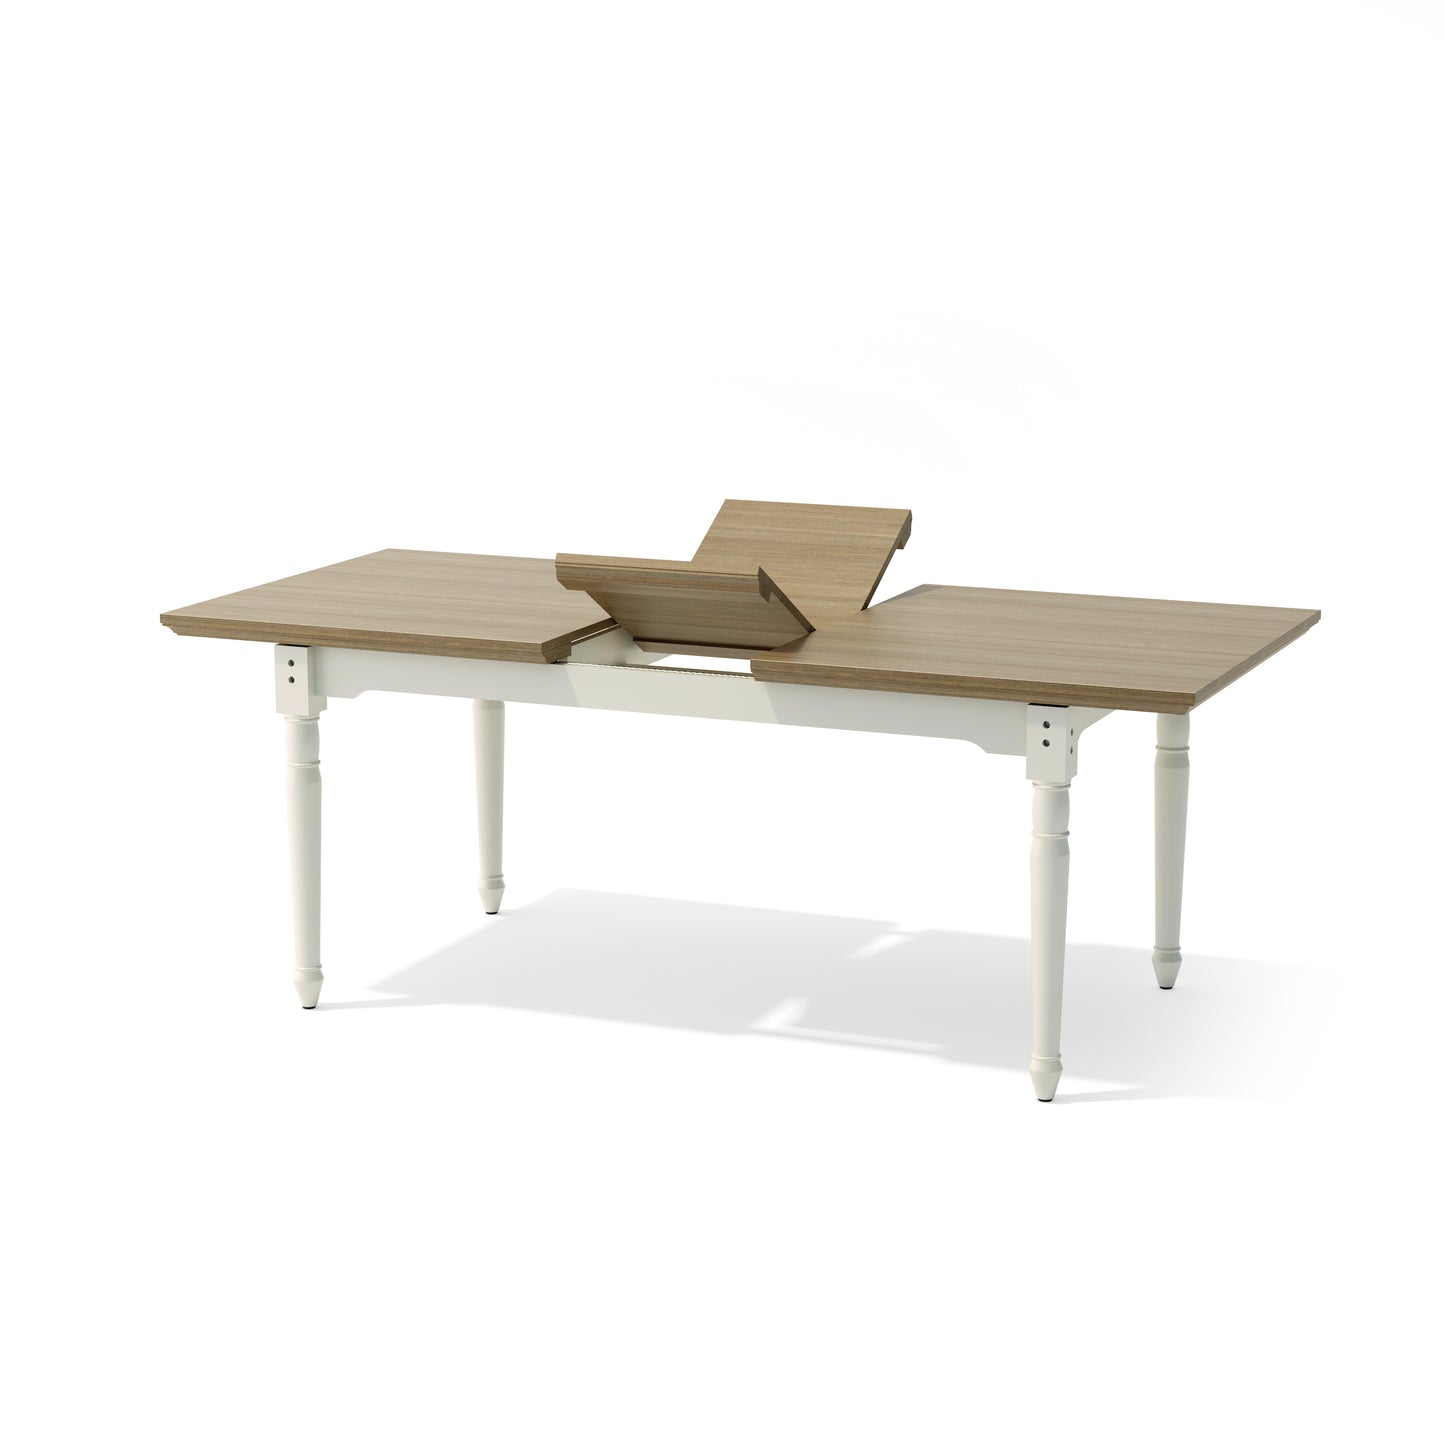 Chenon Extension Dining Table